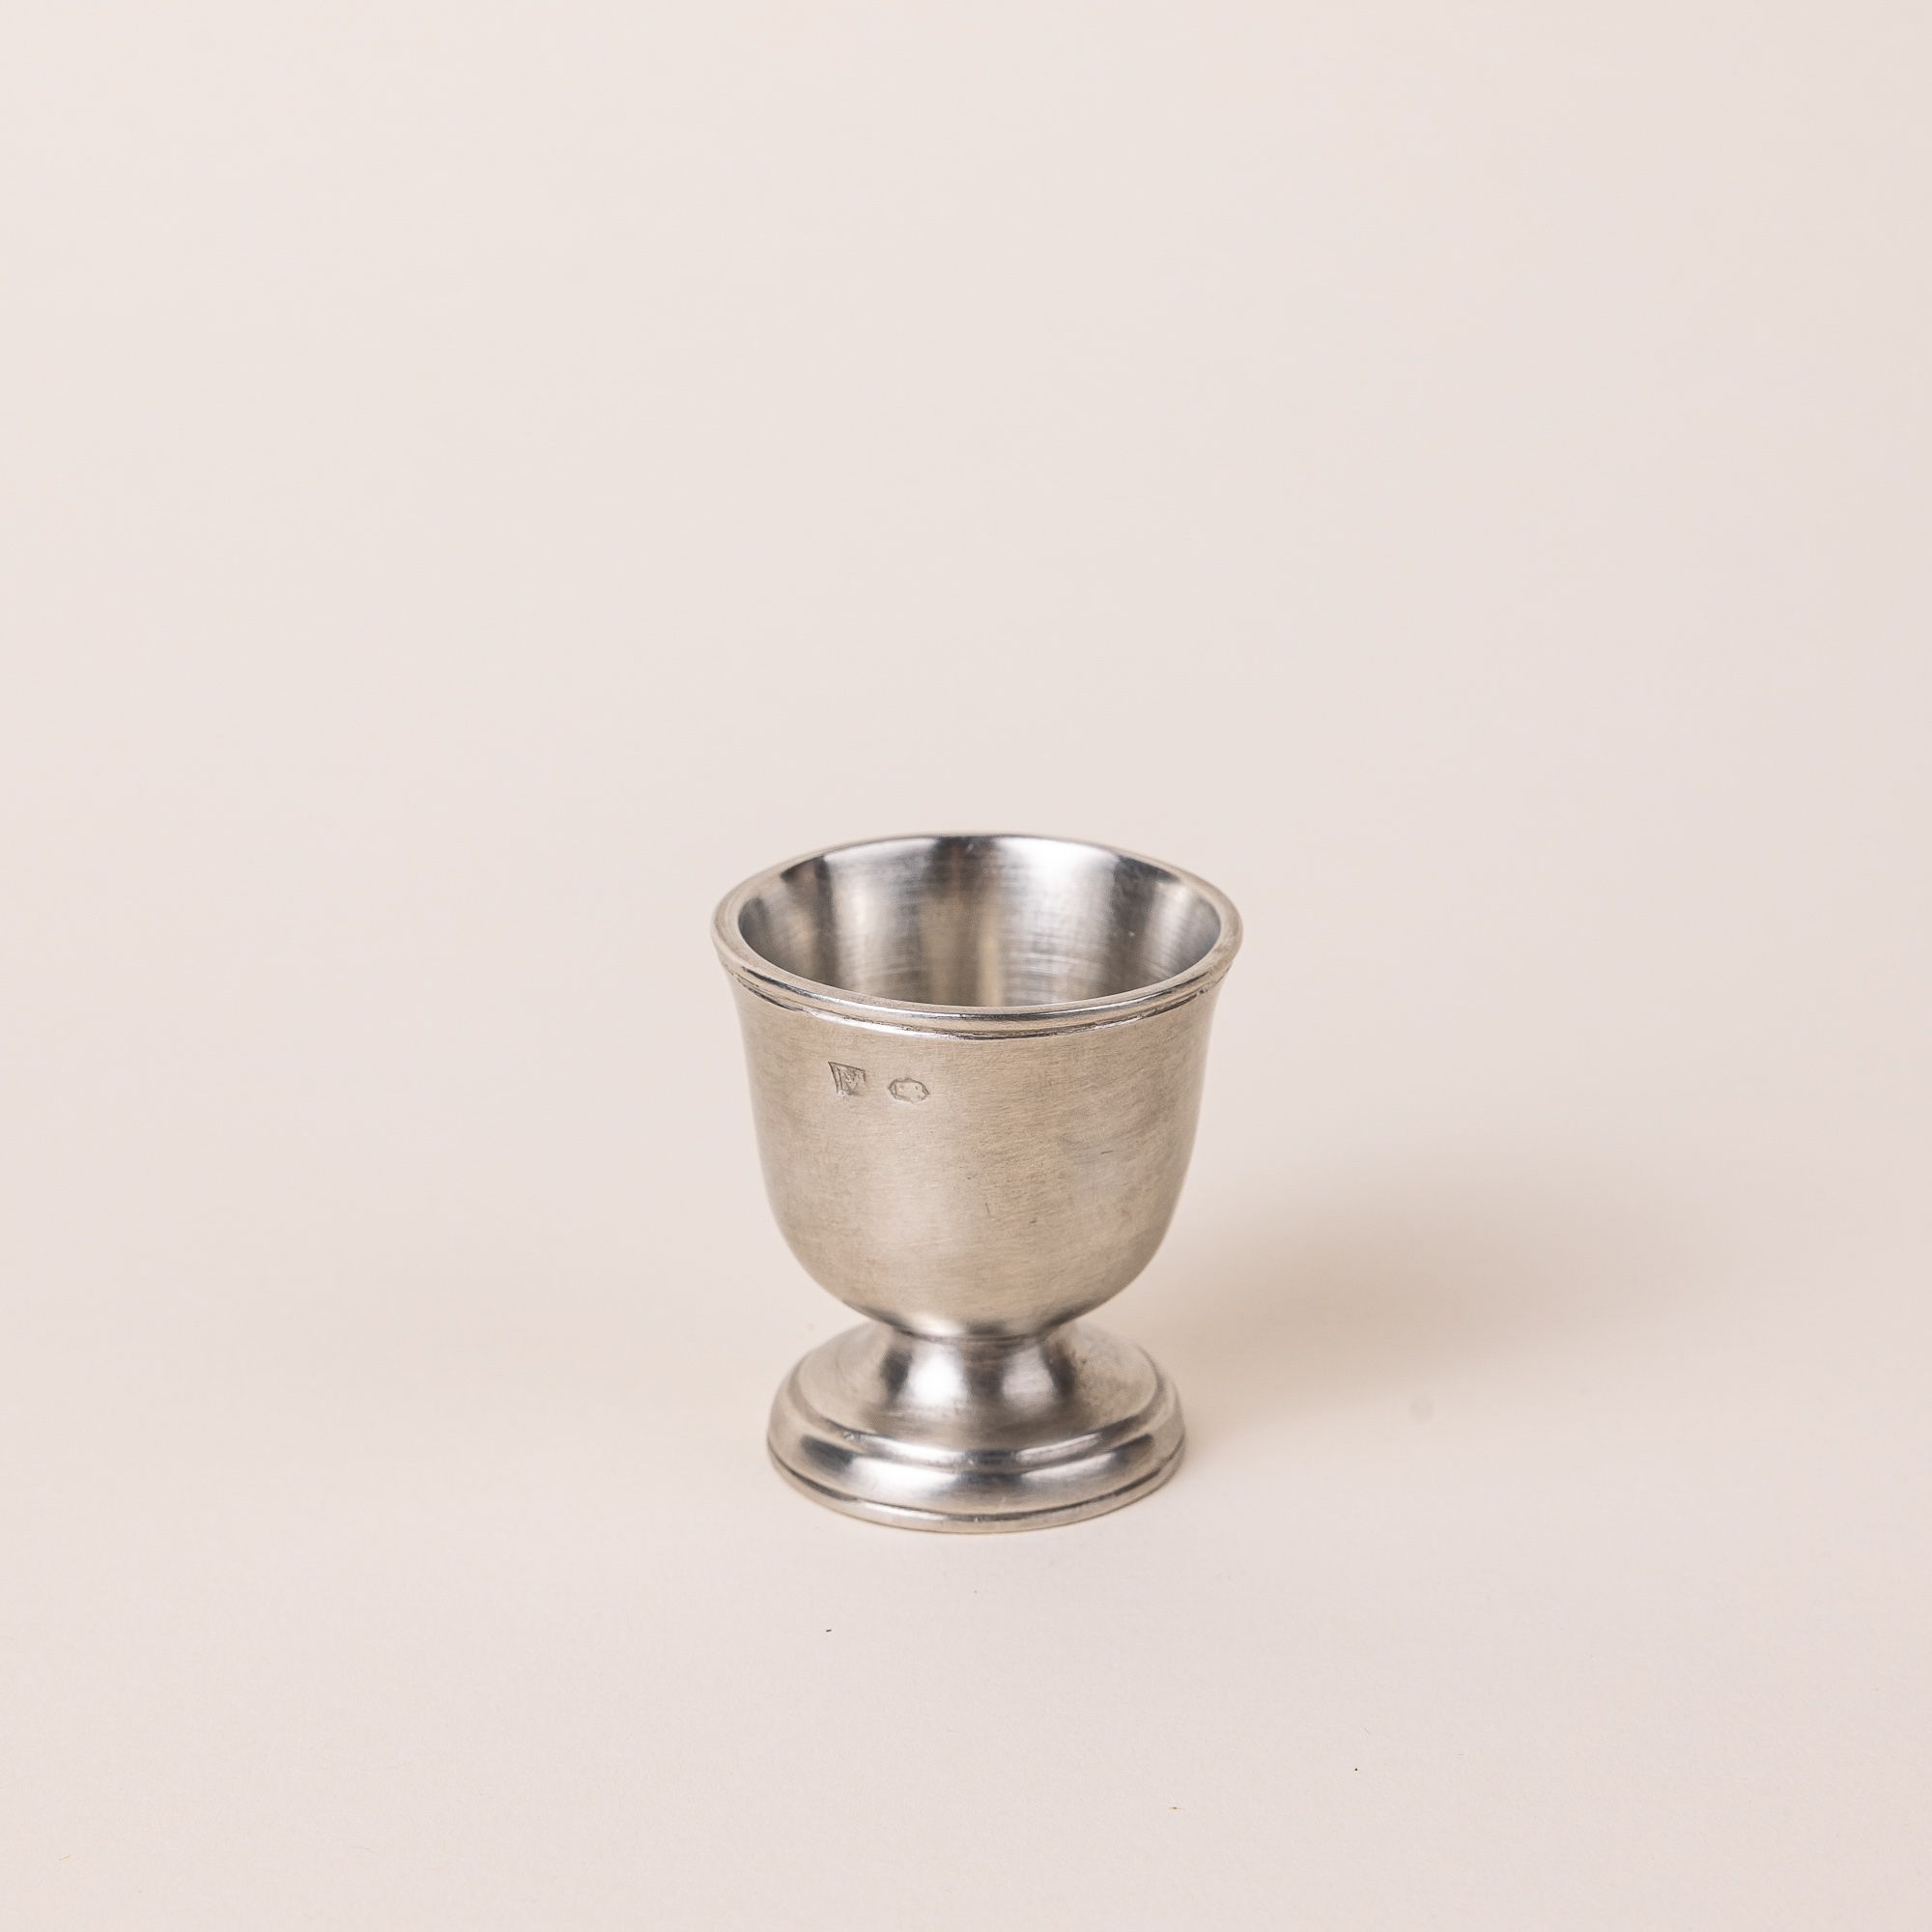 Traditional egg cup in a silver pewter and shaped like a small goblet.